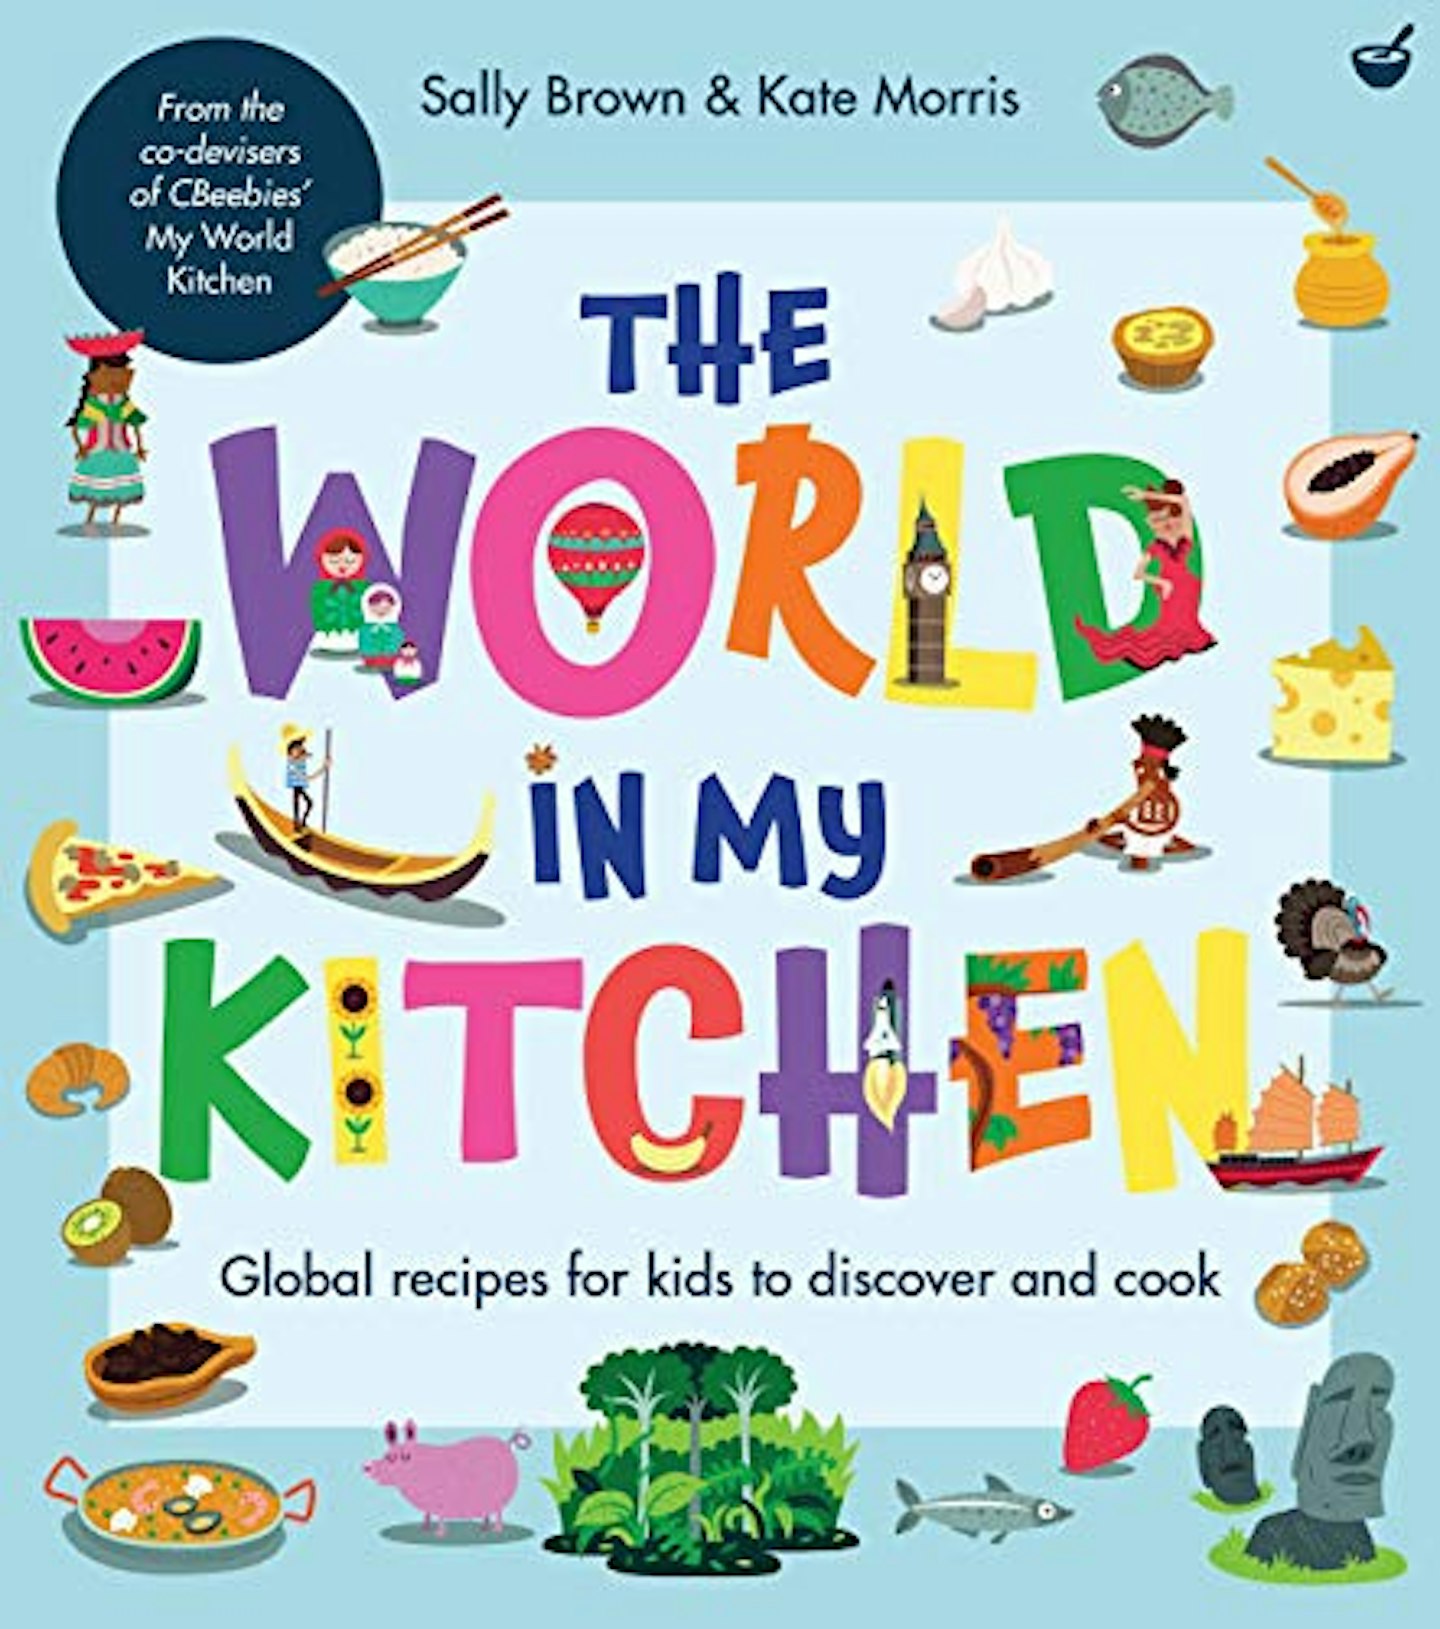 Best kids cookbooks The World in My Kitchen: Global Recipes for Kids to Discover and Cook (from the co-devisers of CBeebiesu0026#039; My World Kitchen)